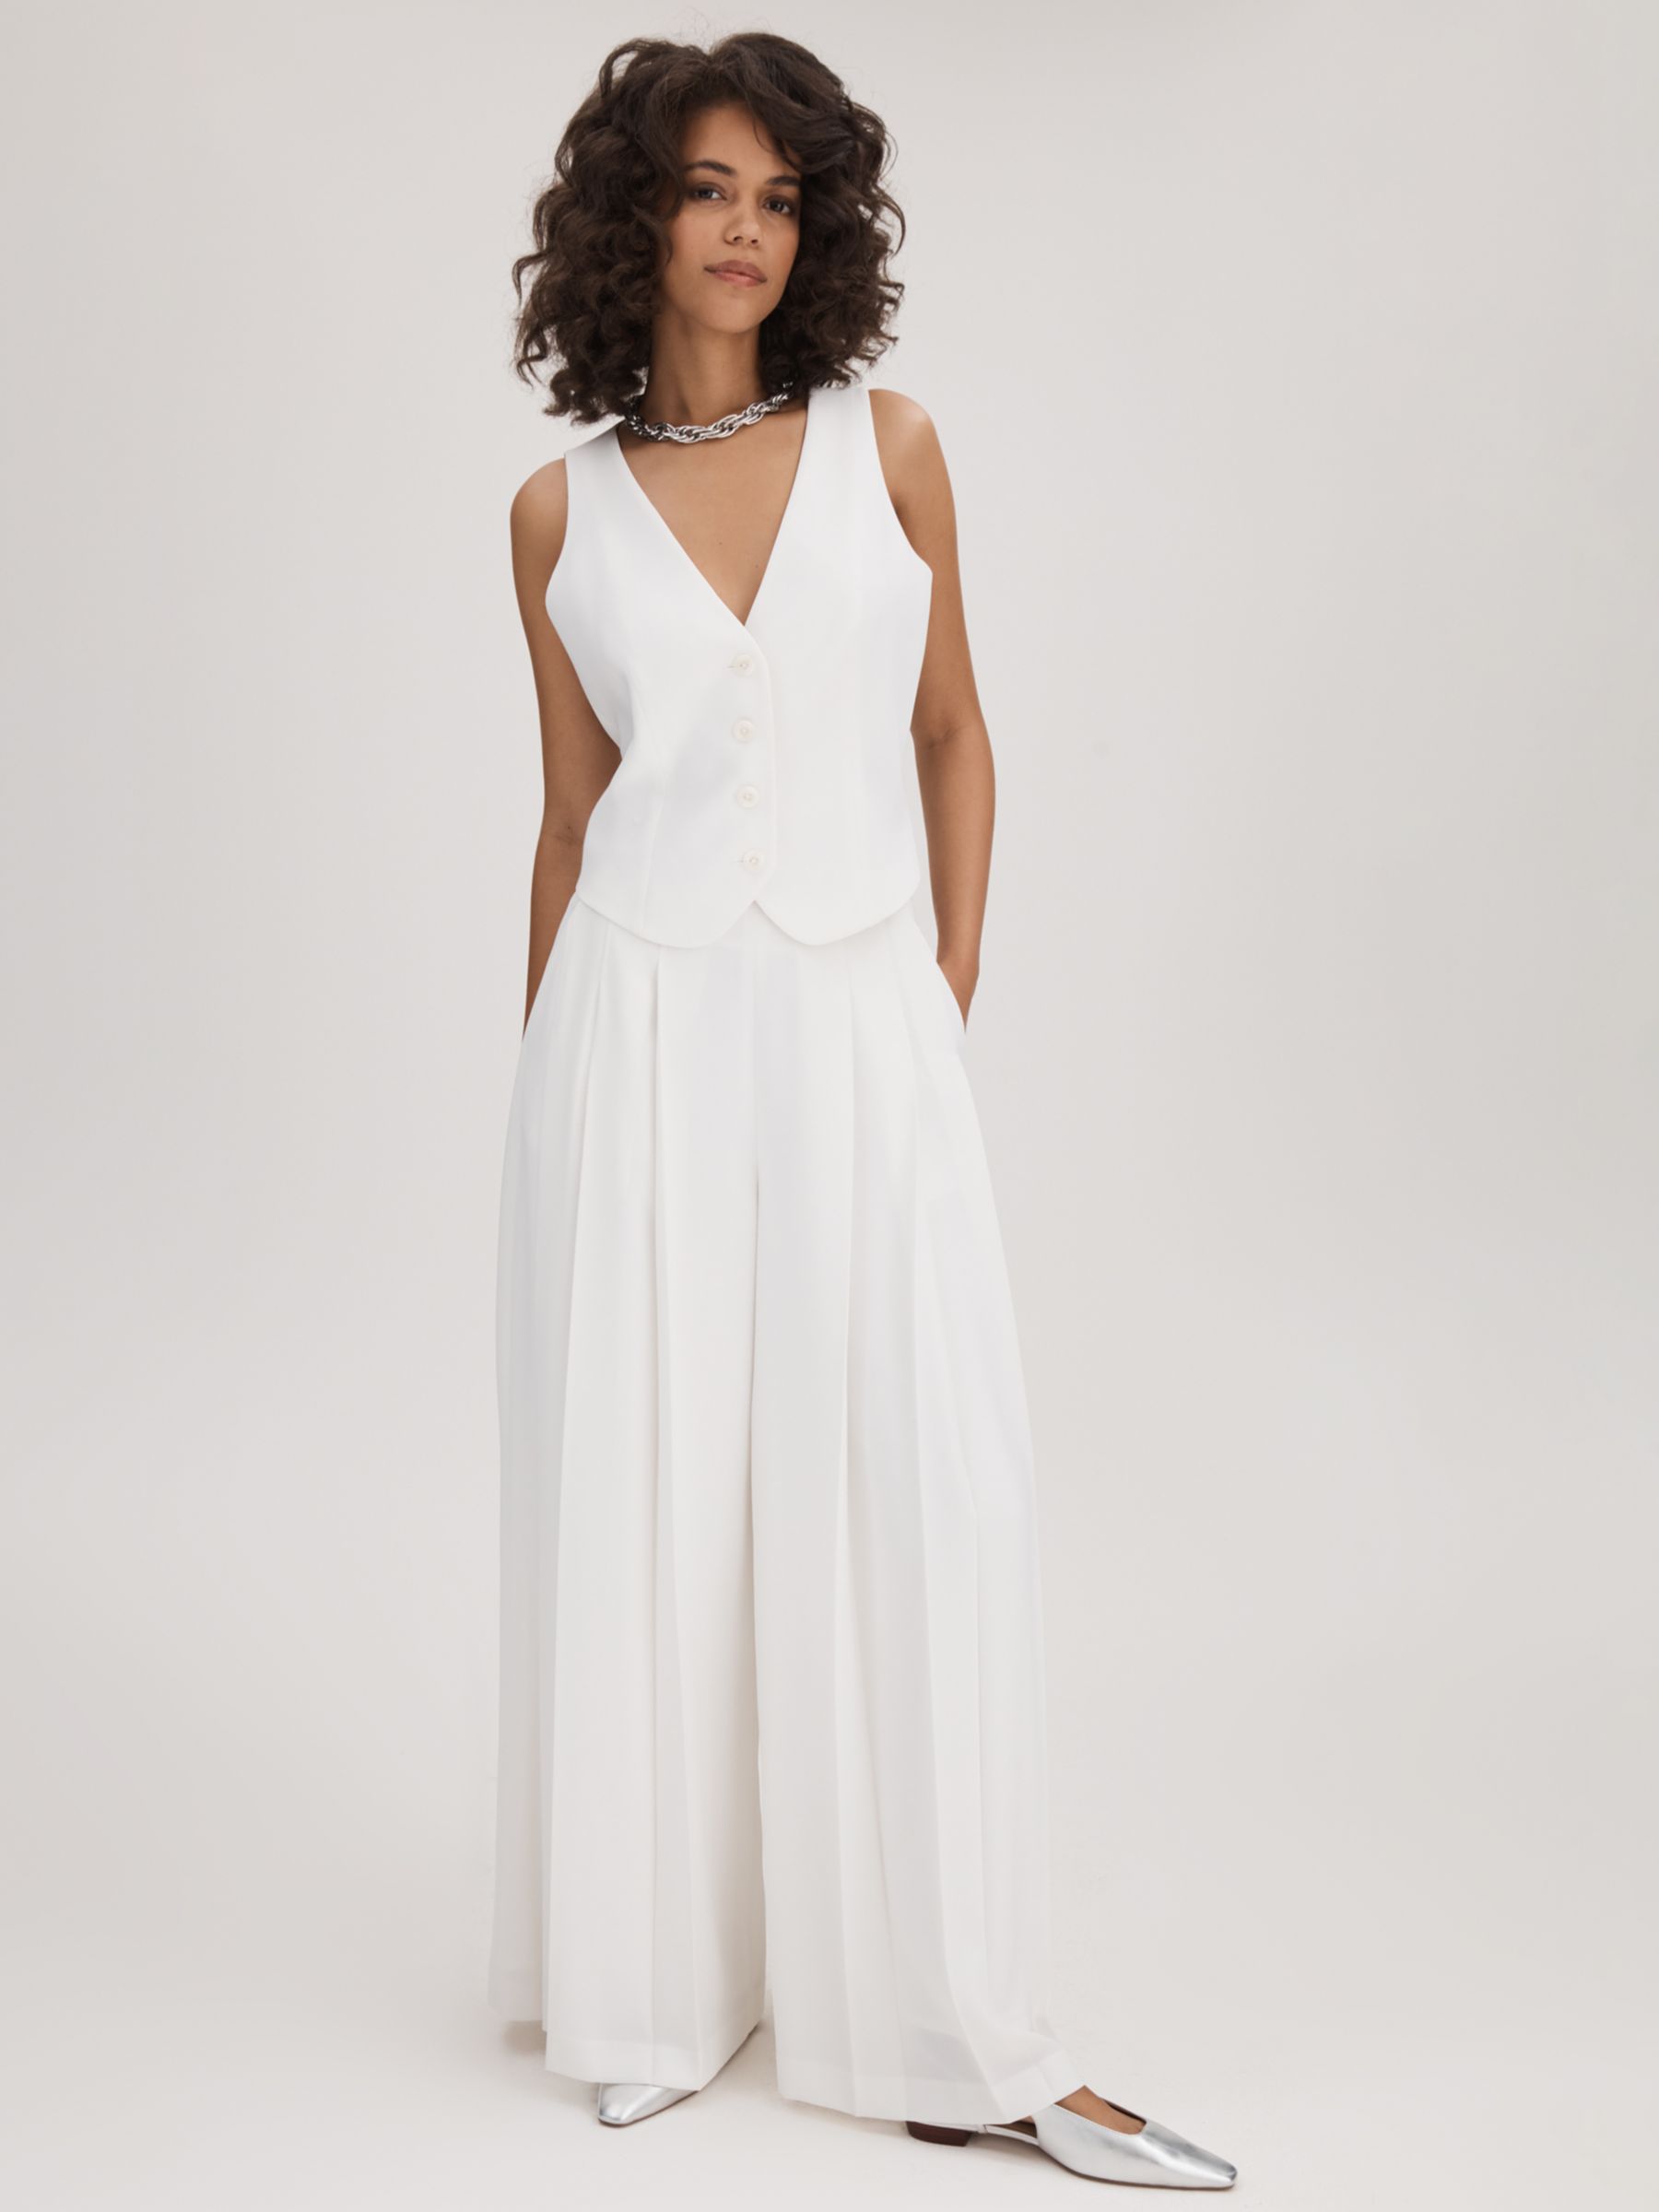 Buy FLORERE Deep Pleat Extra Wide Leg Trousers Online at johnlewis.com